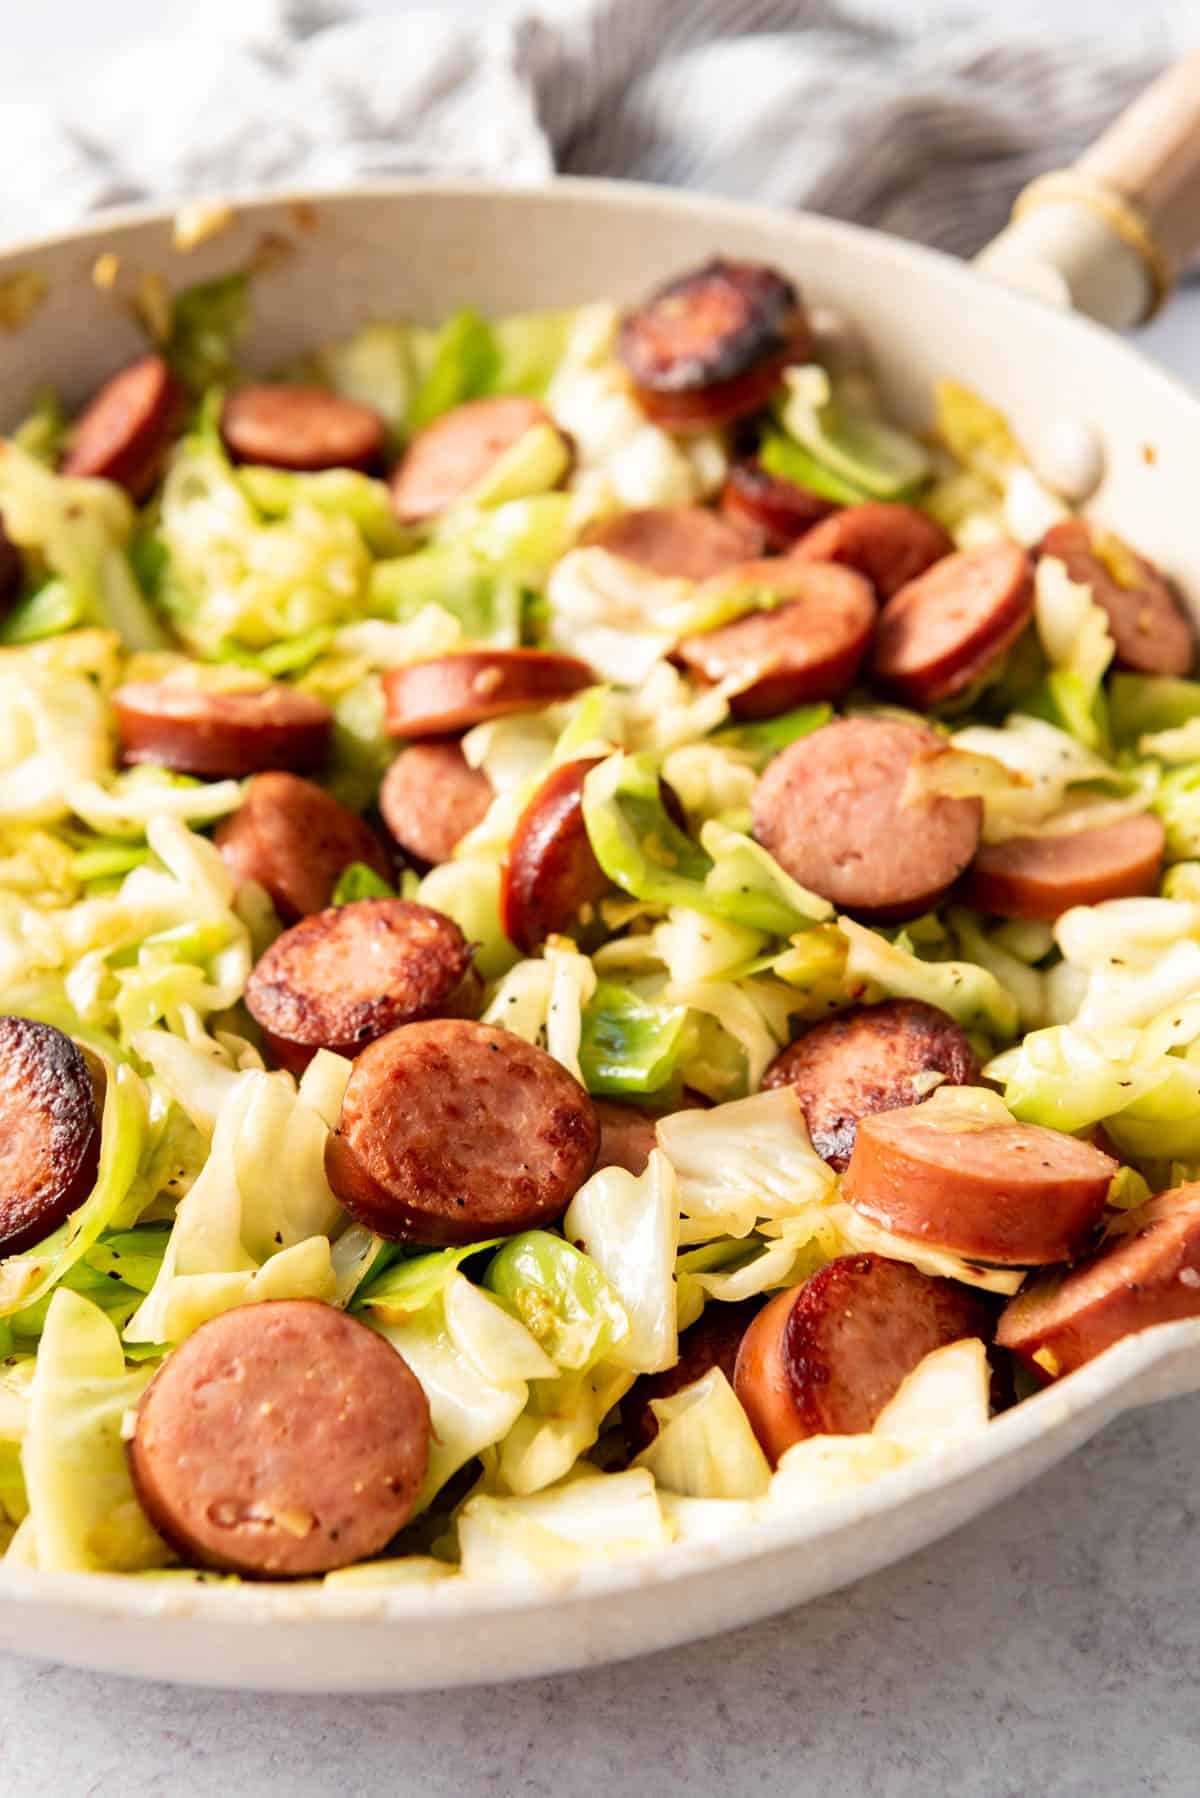 A skillet cabbage and sausage meal in a large pan.